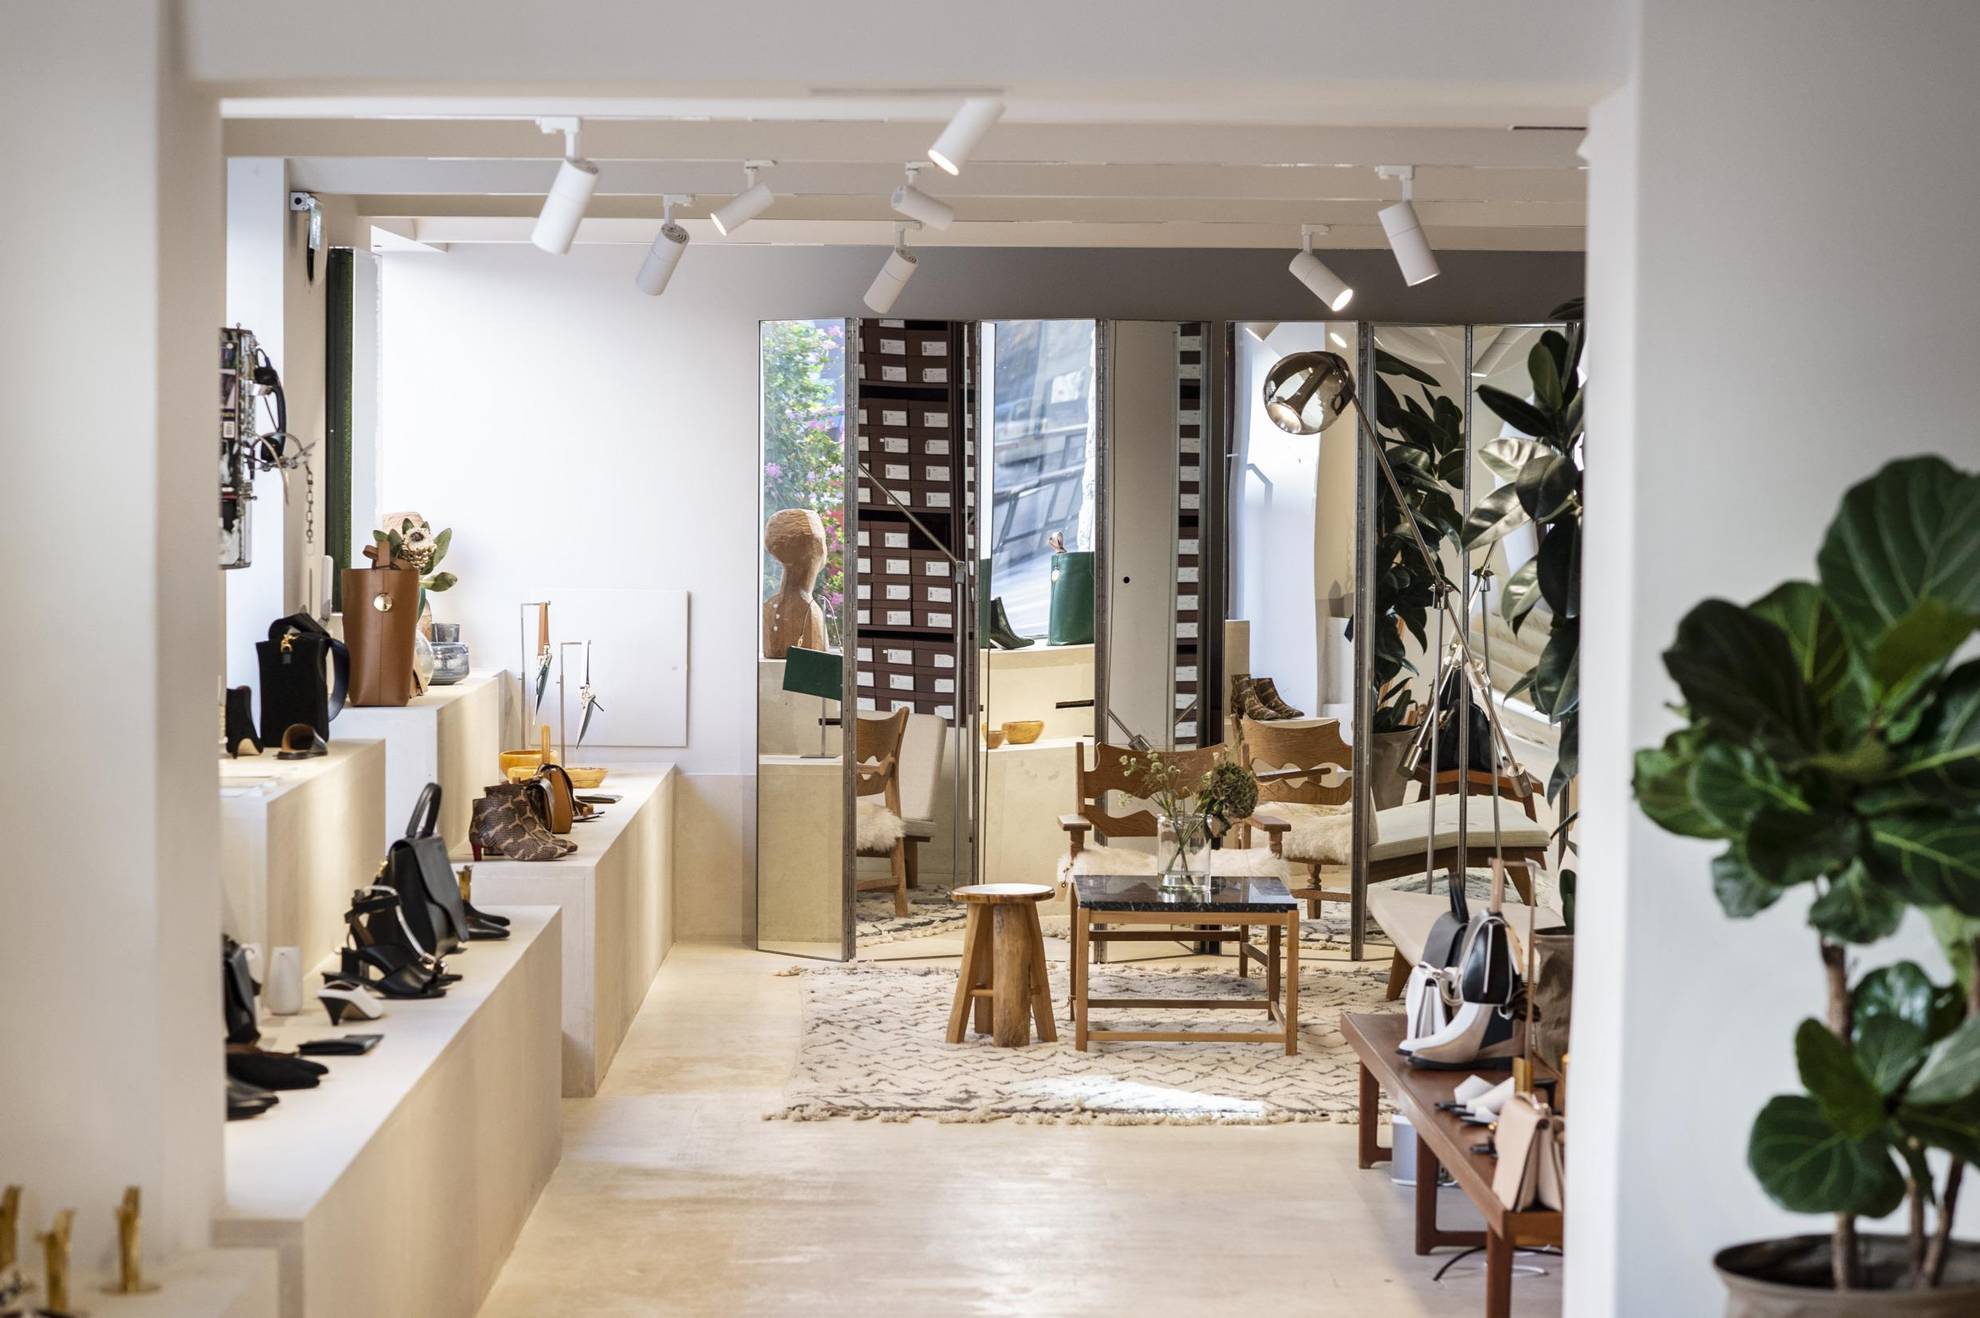 The bright interior of ATP atelier, with large windows by one wall, and footwear and accessory on display.